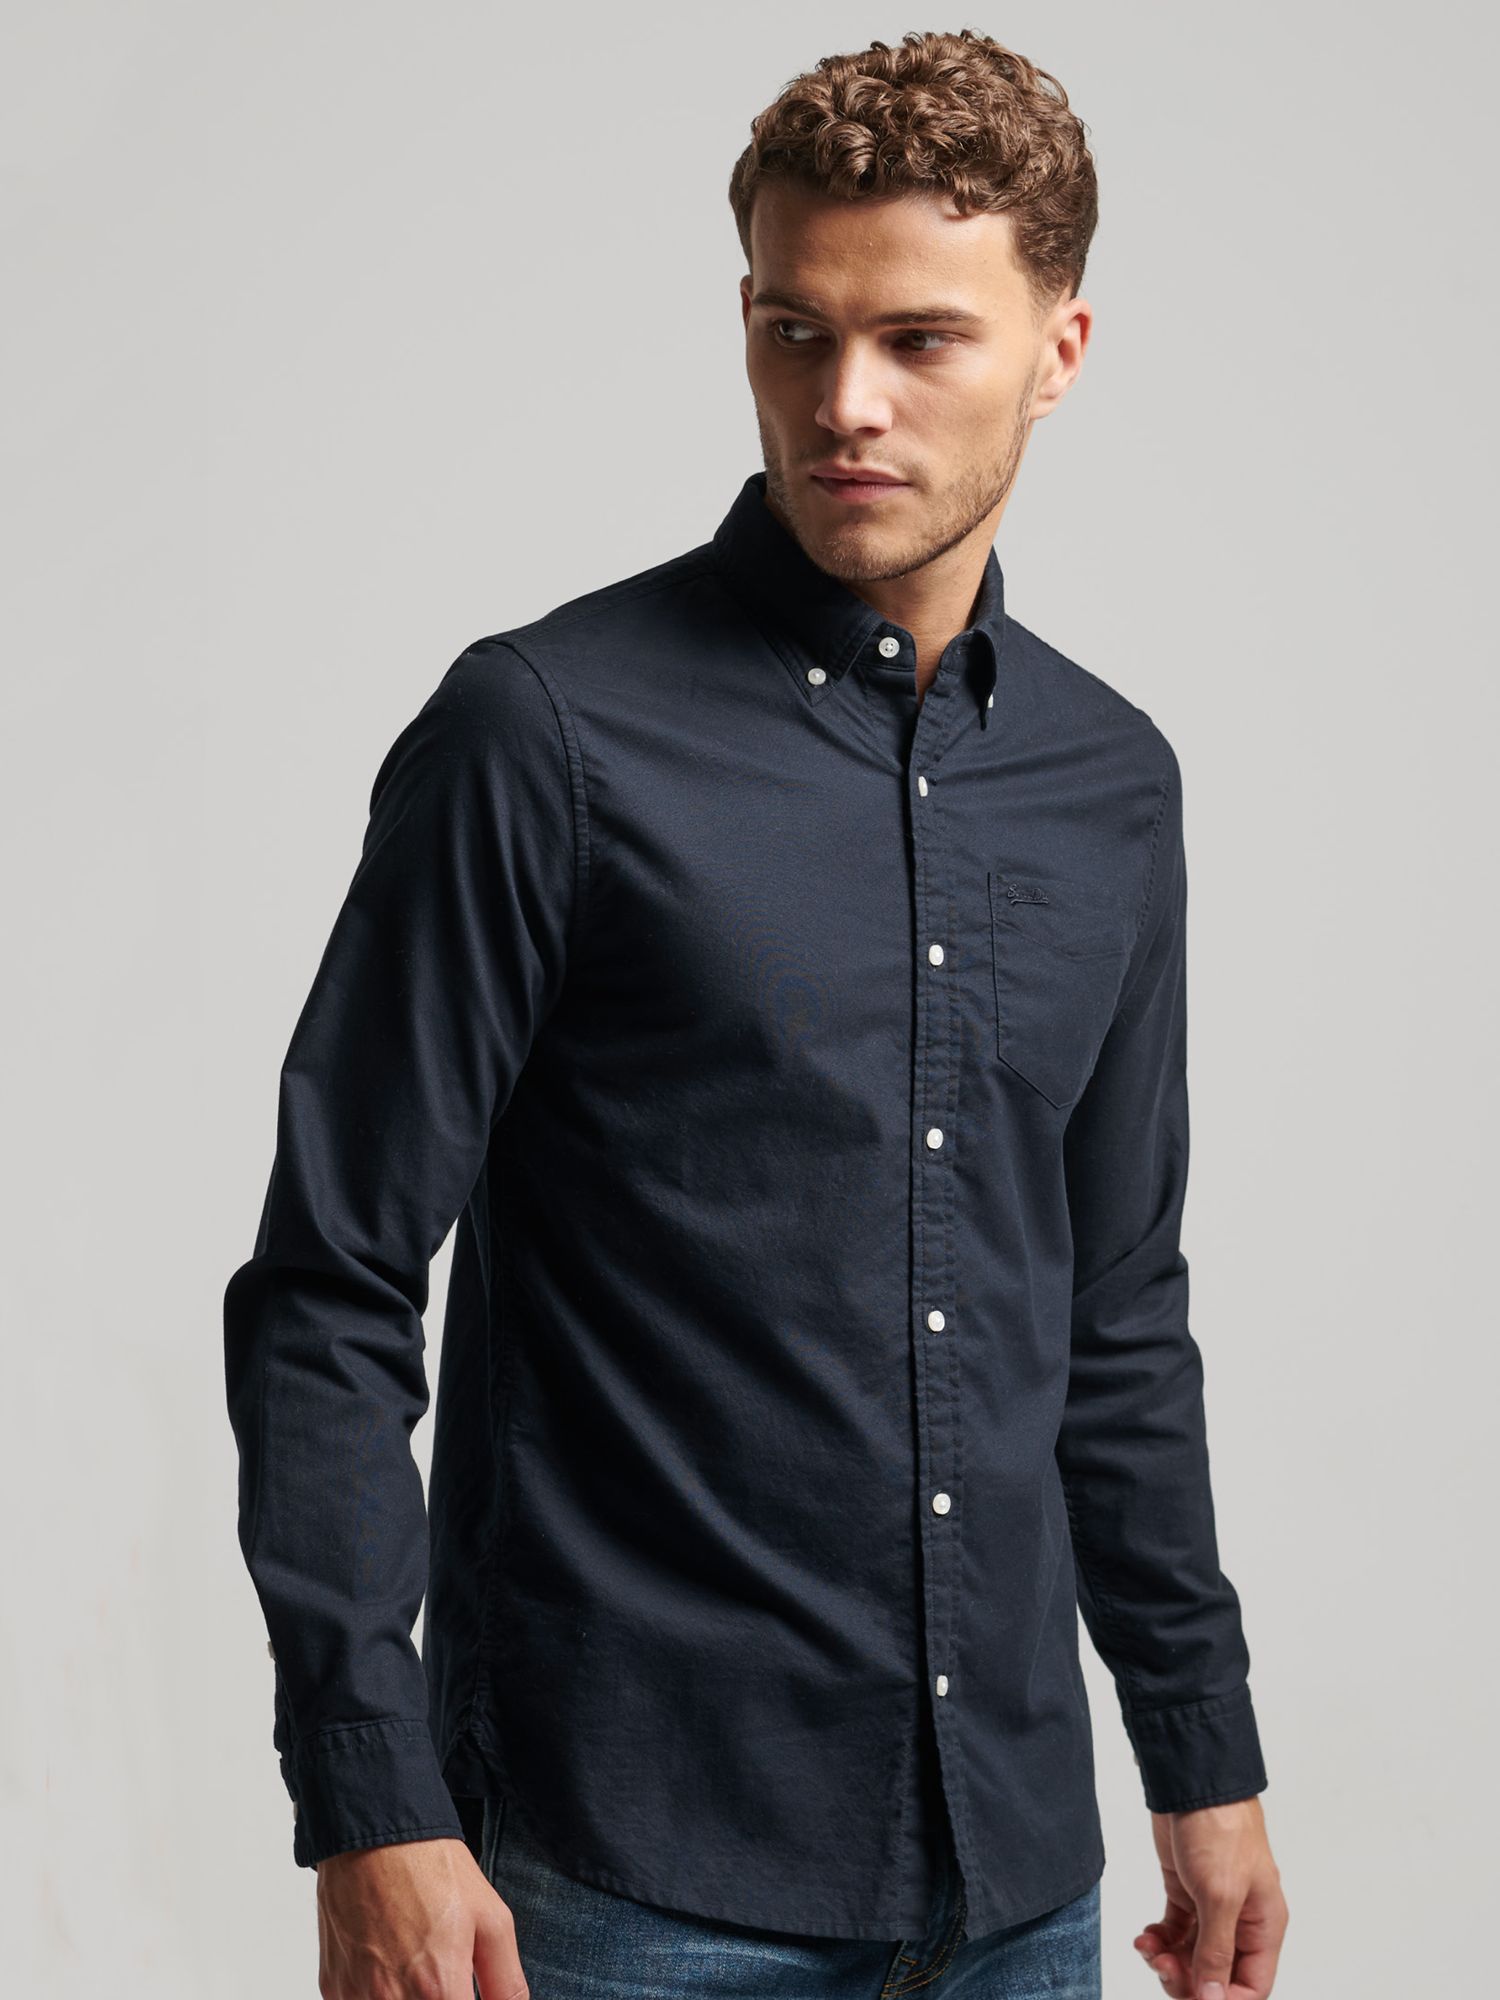 Superdry Washed Oxford Shirt, Eclipse Navy at John Lewis & Partners